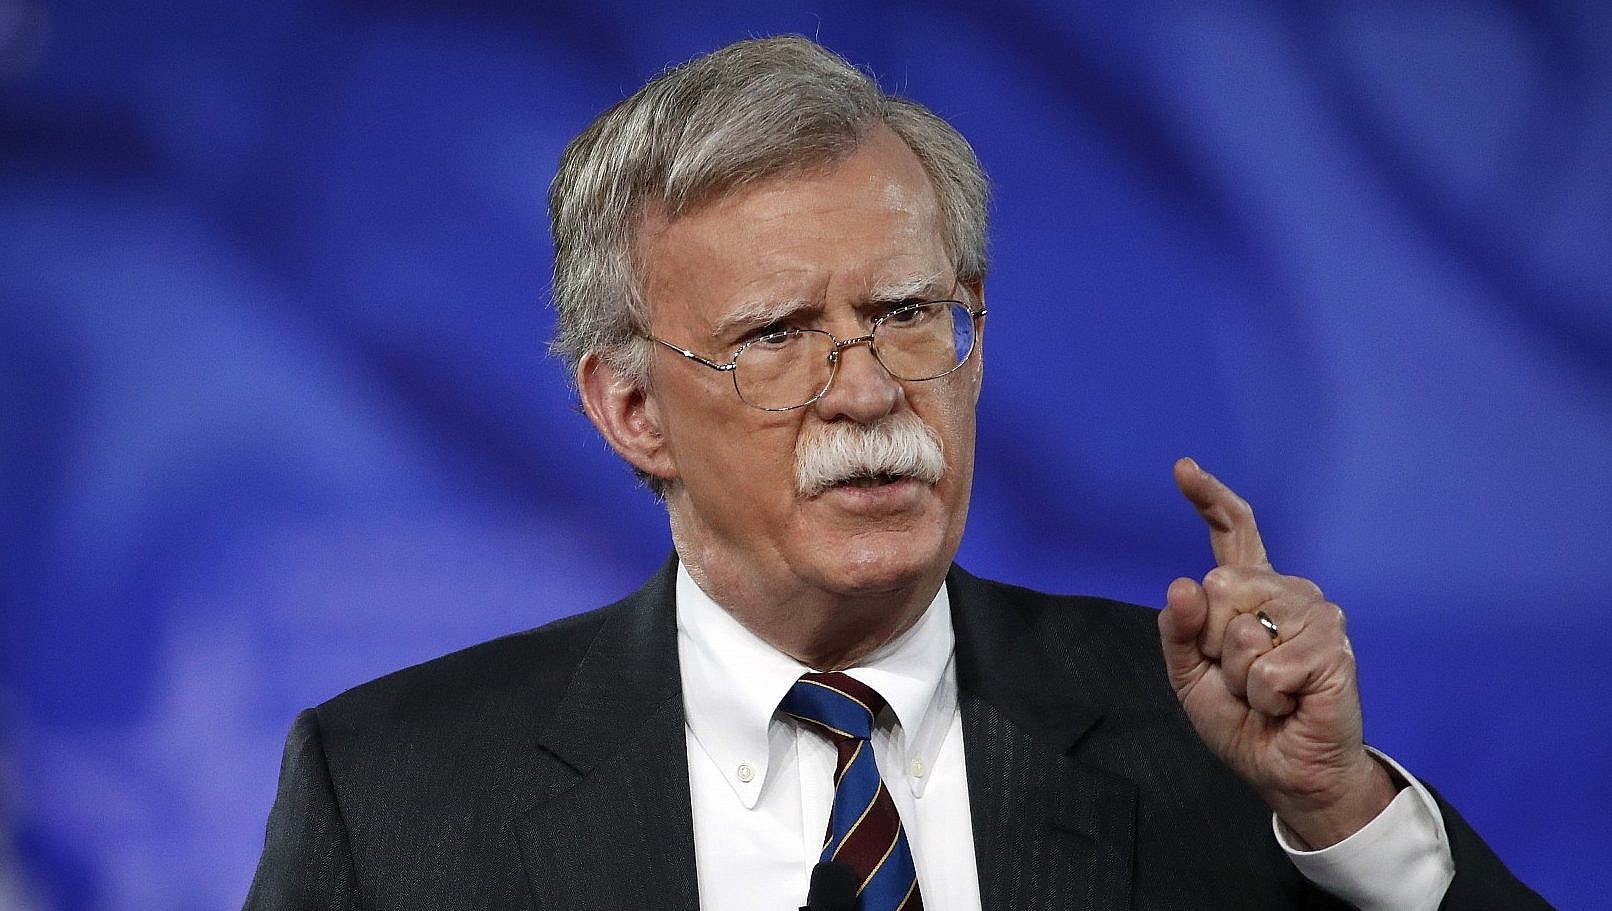 U.S. National Security Adviser, John Bolton. [PHOTO CREDIT: The Times of Israel]